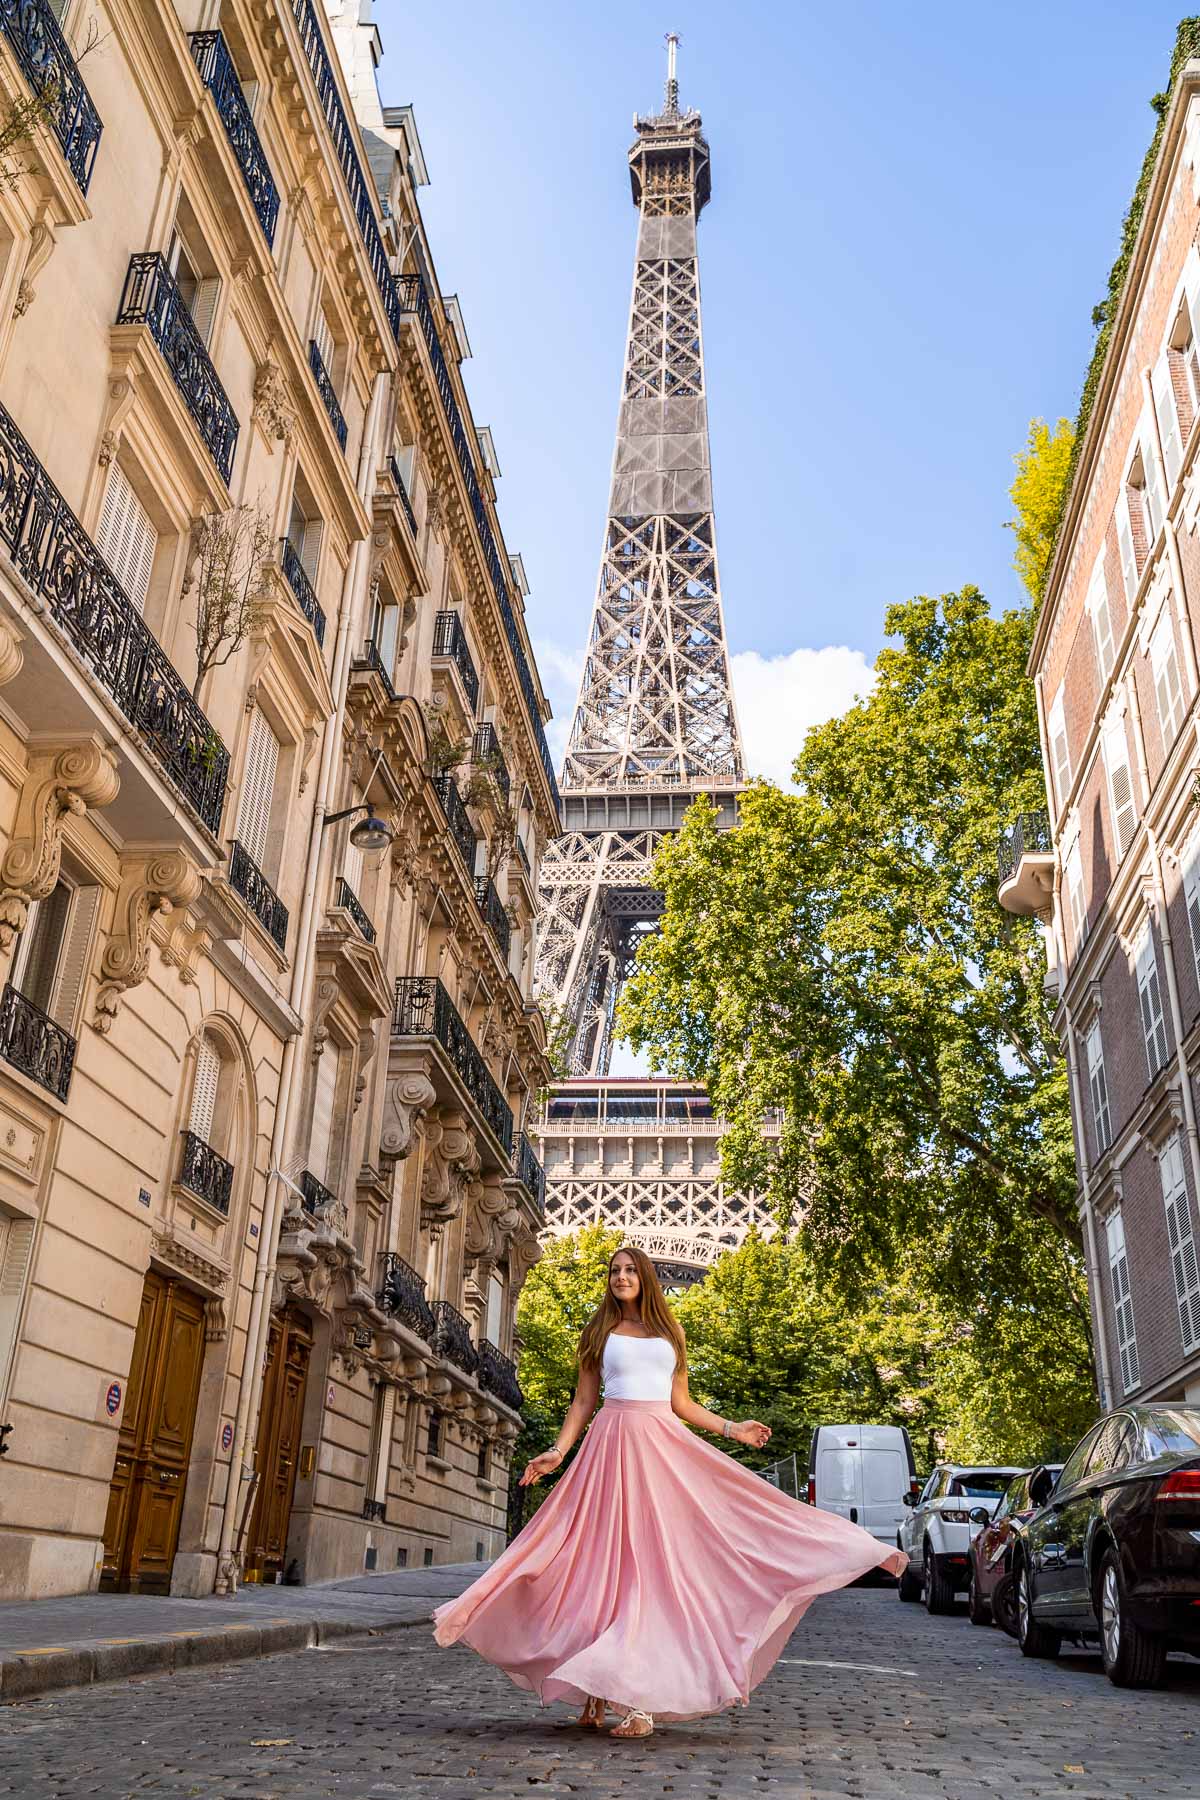 Girl in a pink skirt twirling in front of the Eiffel Tower in Rue de l'Université, one of the most instagrammable places in Paris